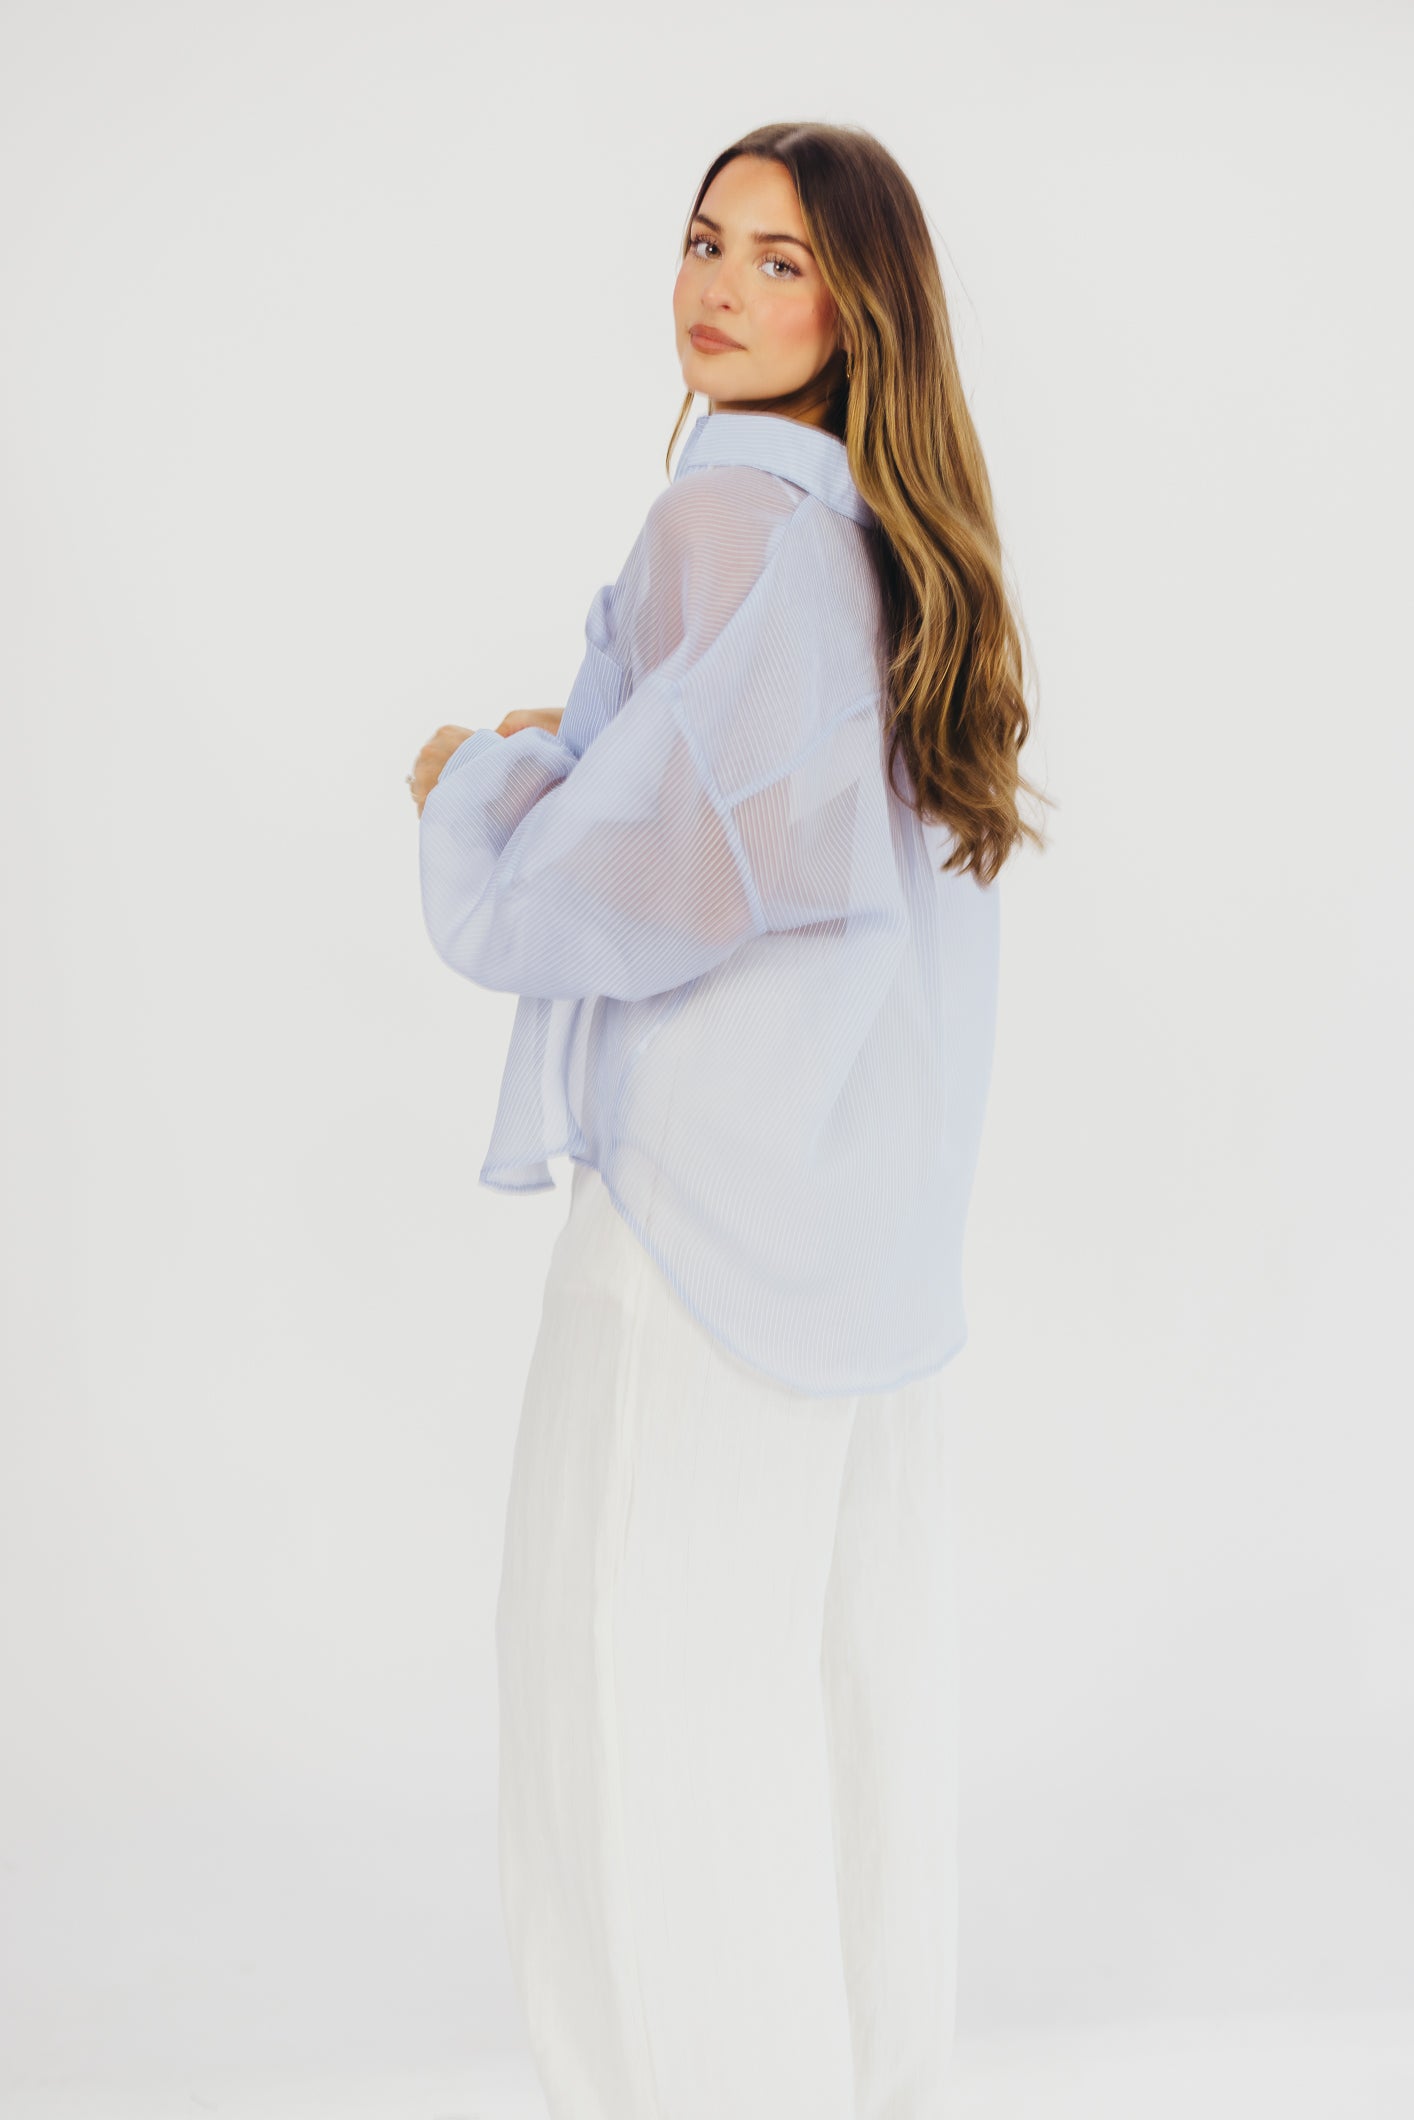 Katie Sheer Button-Up in Dusty Blue